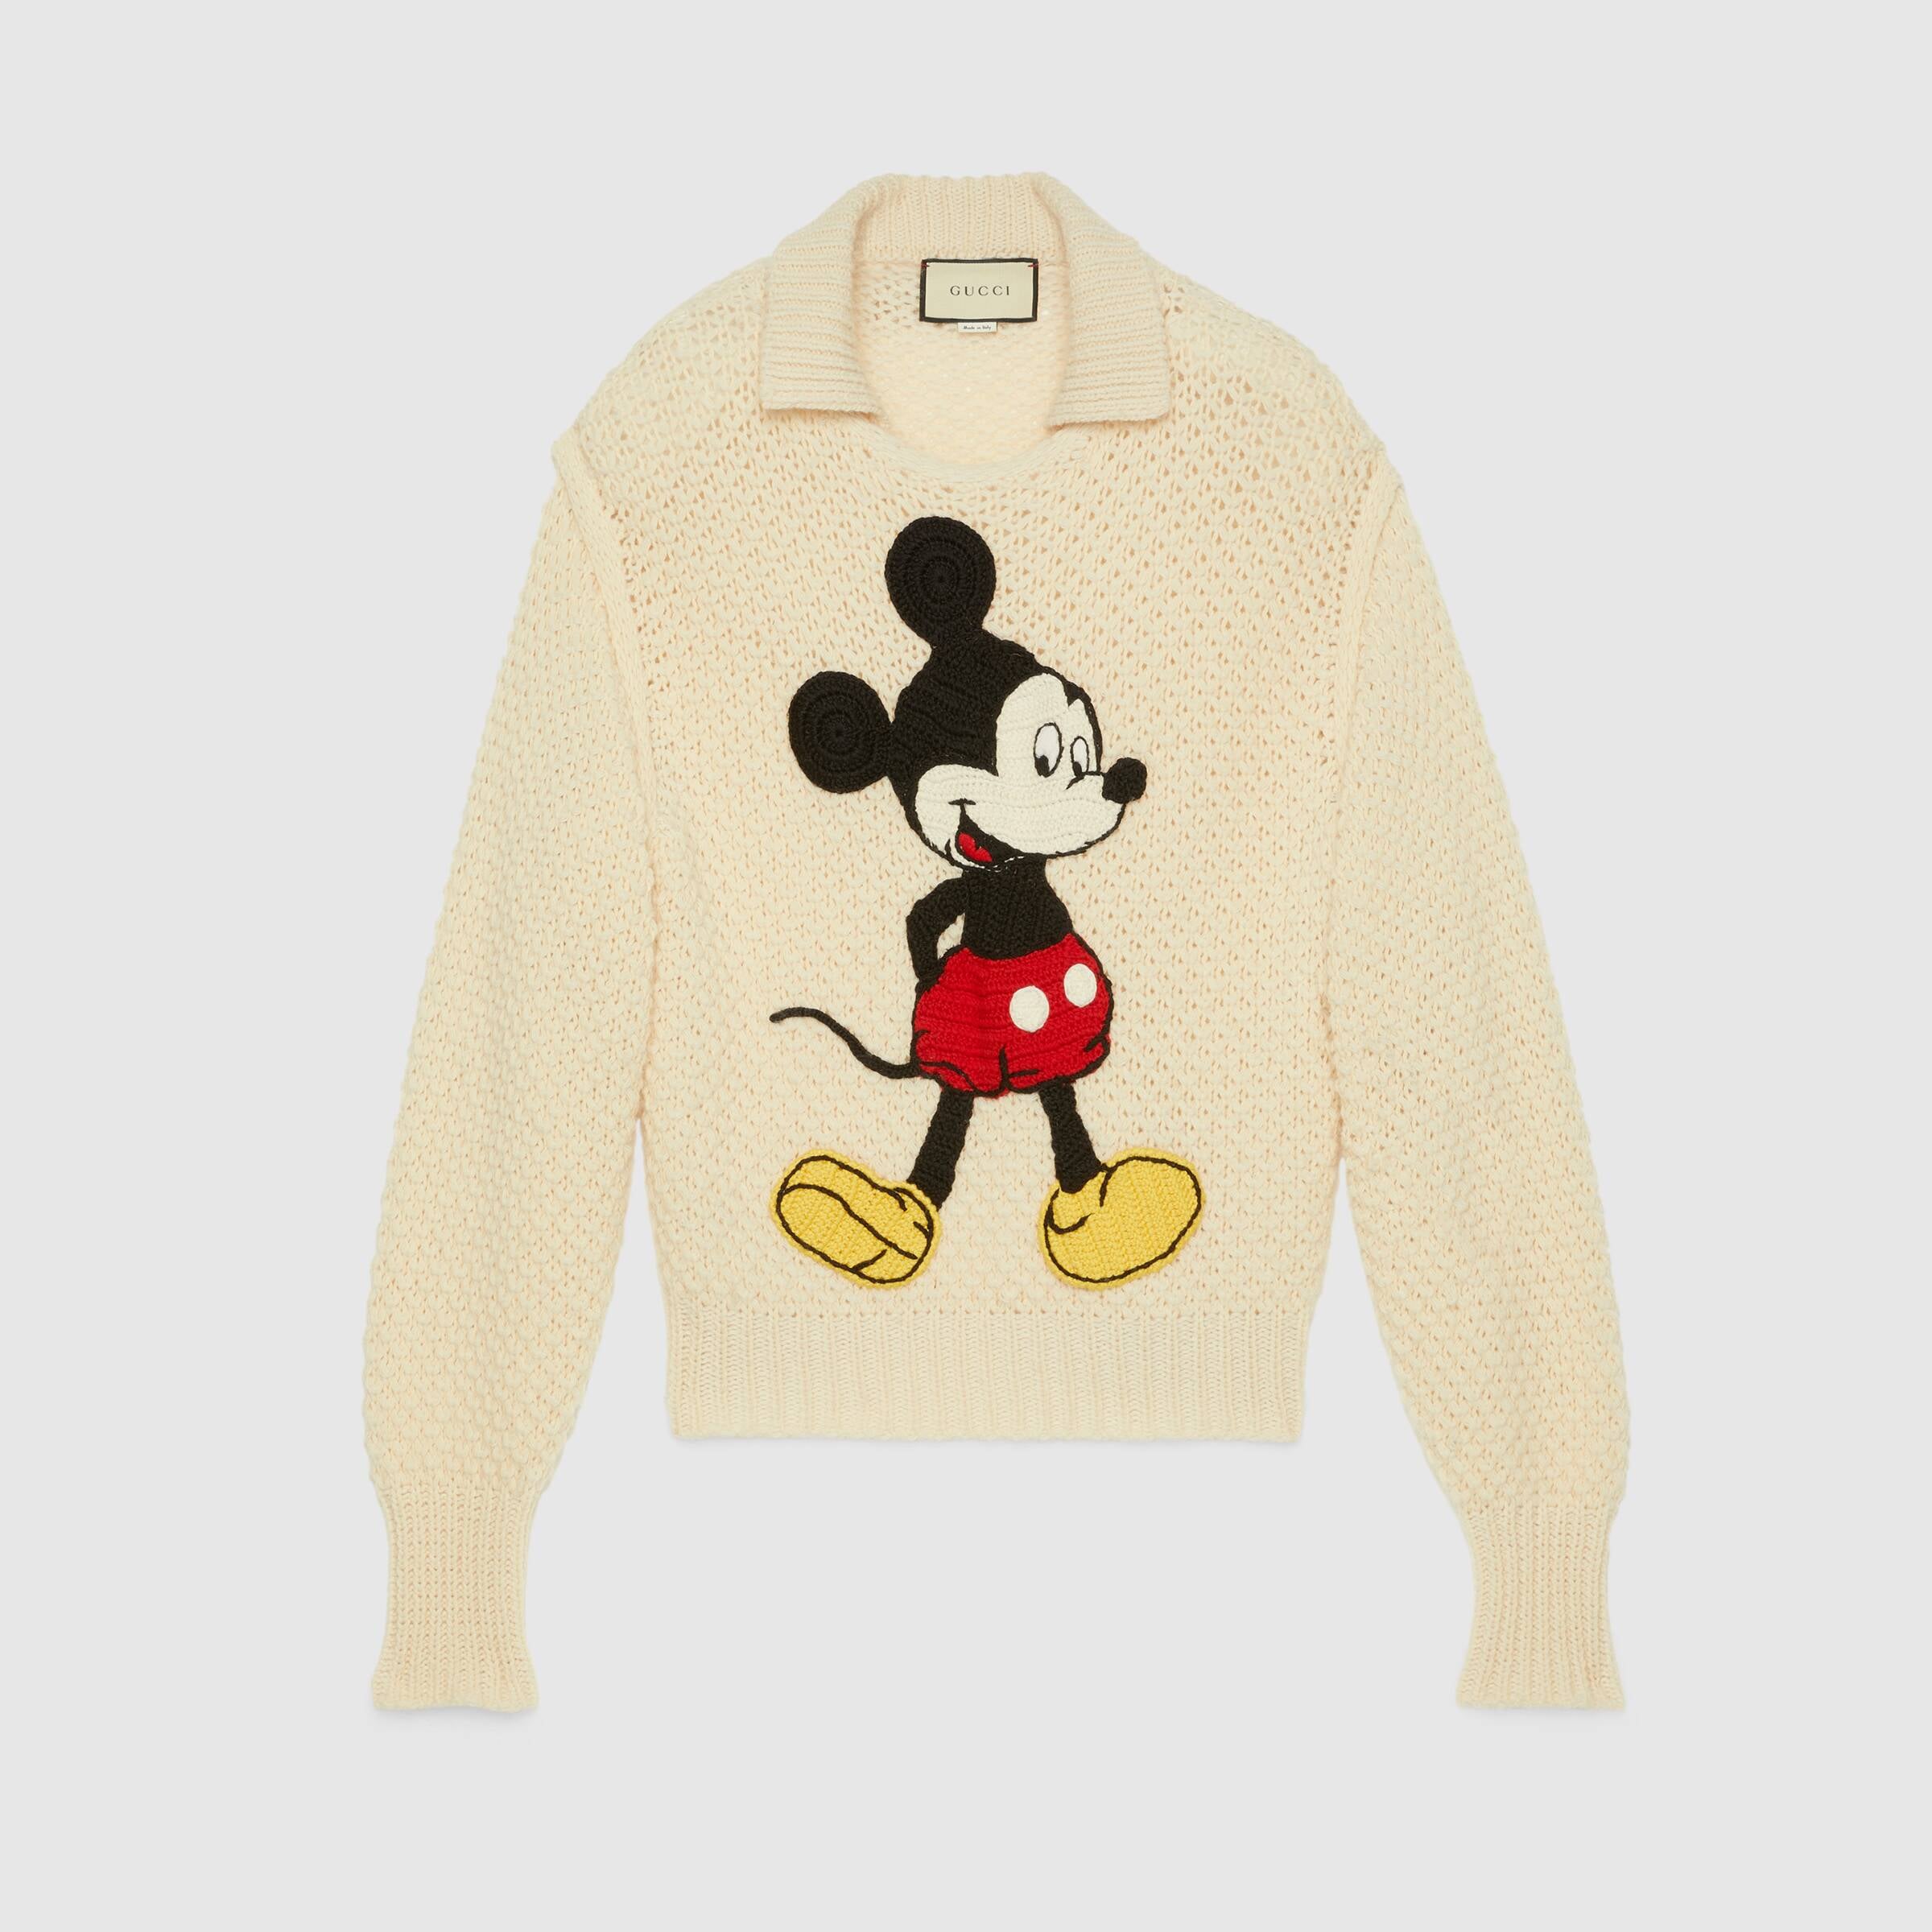 Mickey And Minnie Gucci Shirt - Vintage & Classic Tee